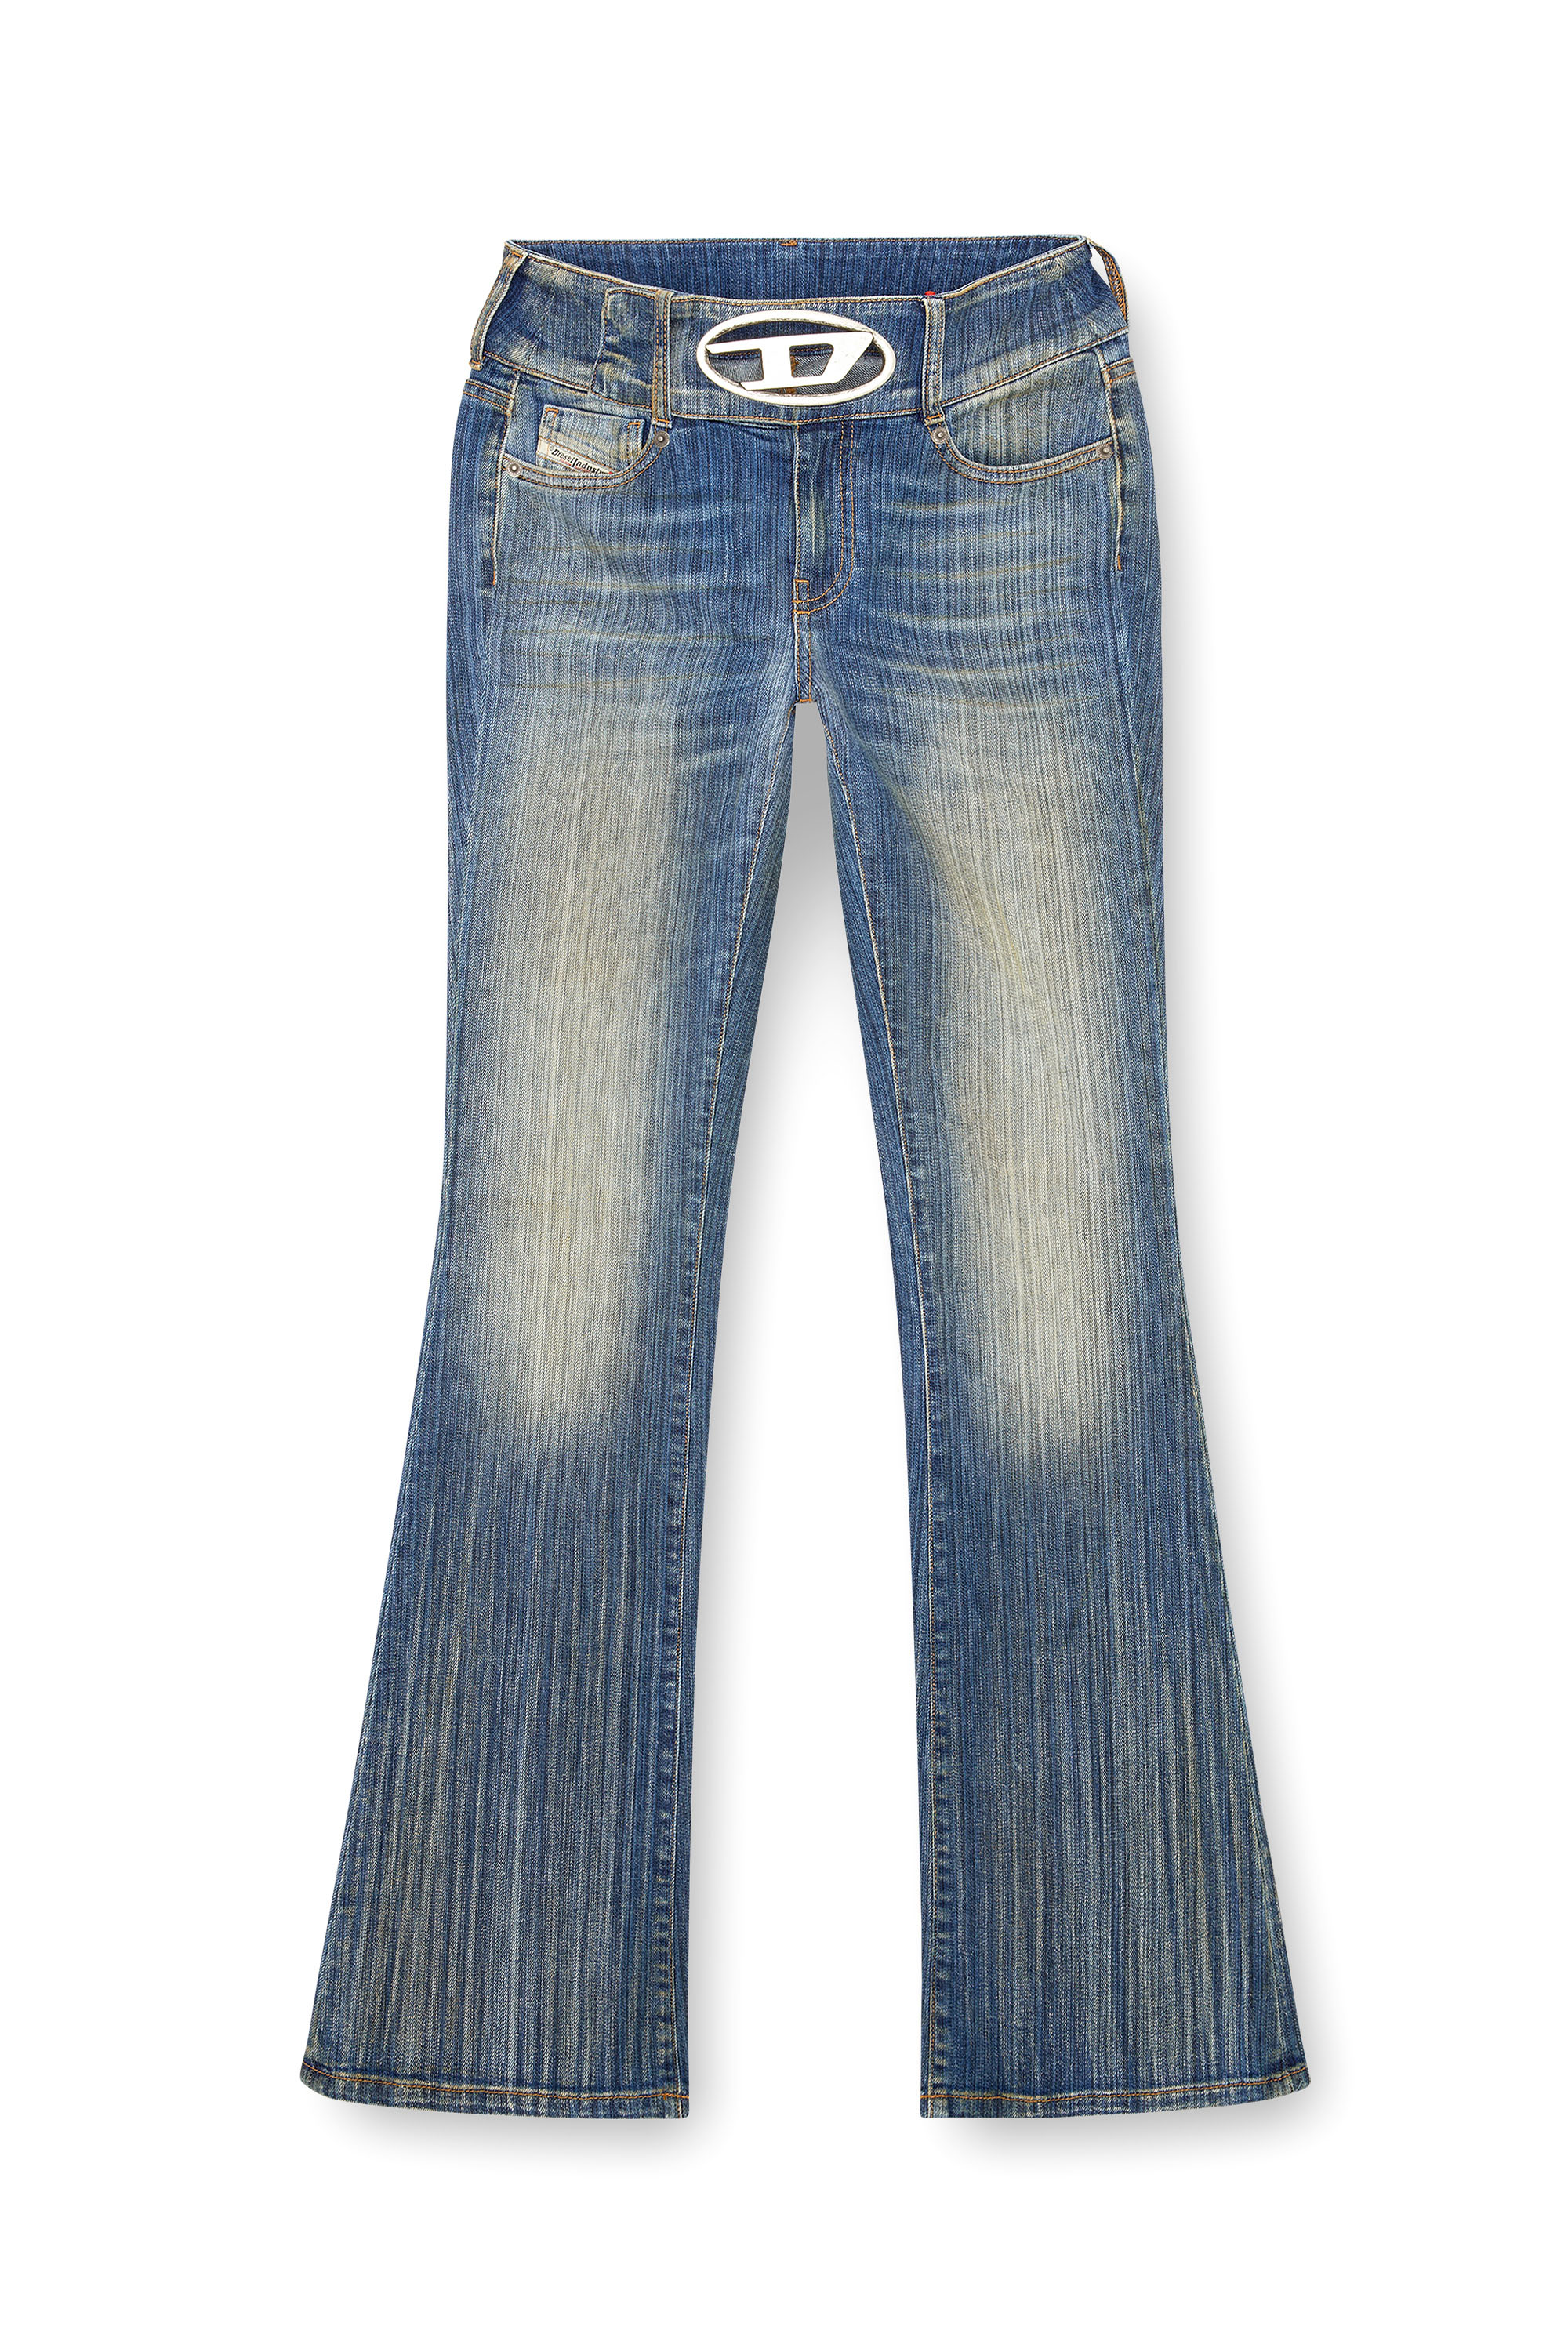 Diesel - Bootcut and Flare Jeans D-Propol 0CBCX, Mujer Bootcut y Flare Jeans - D-Propol in Azul marino - Image 3